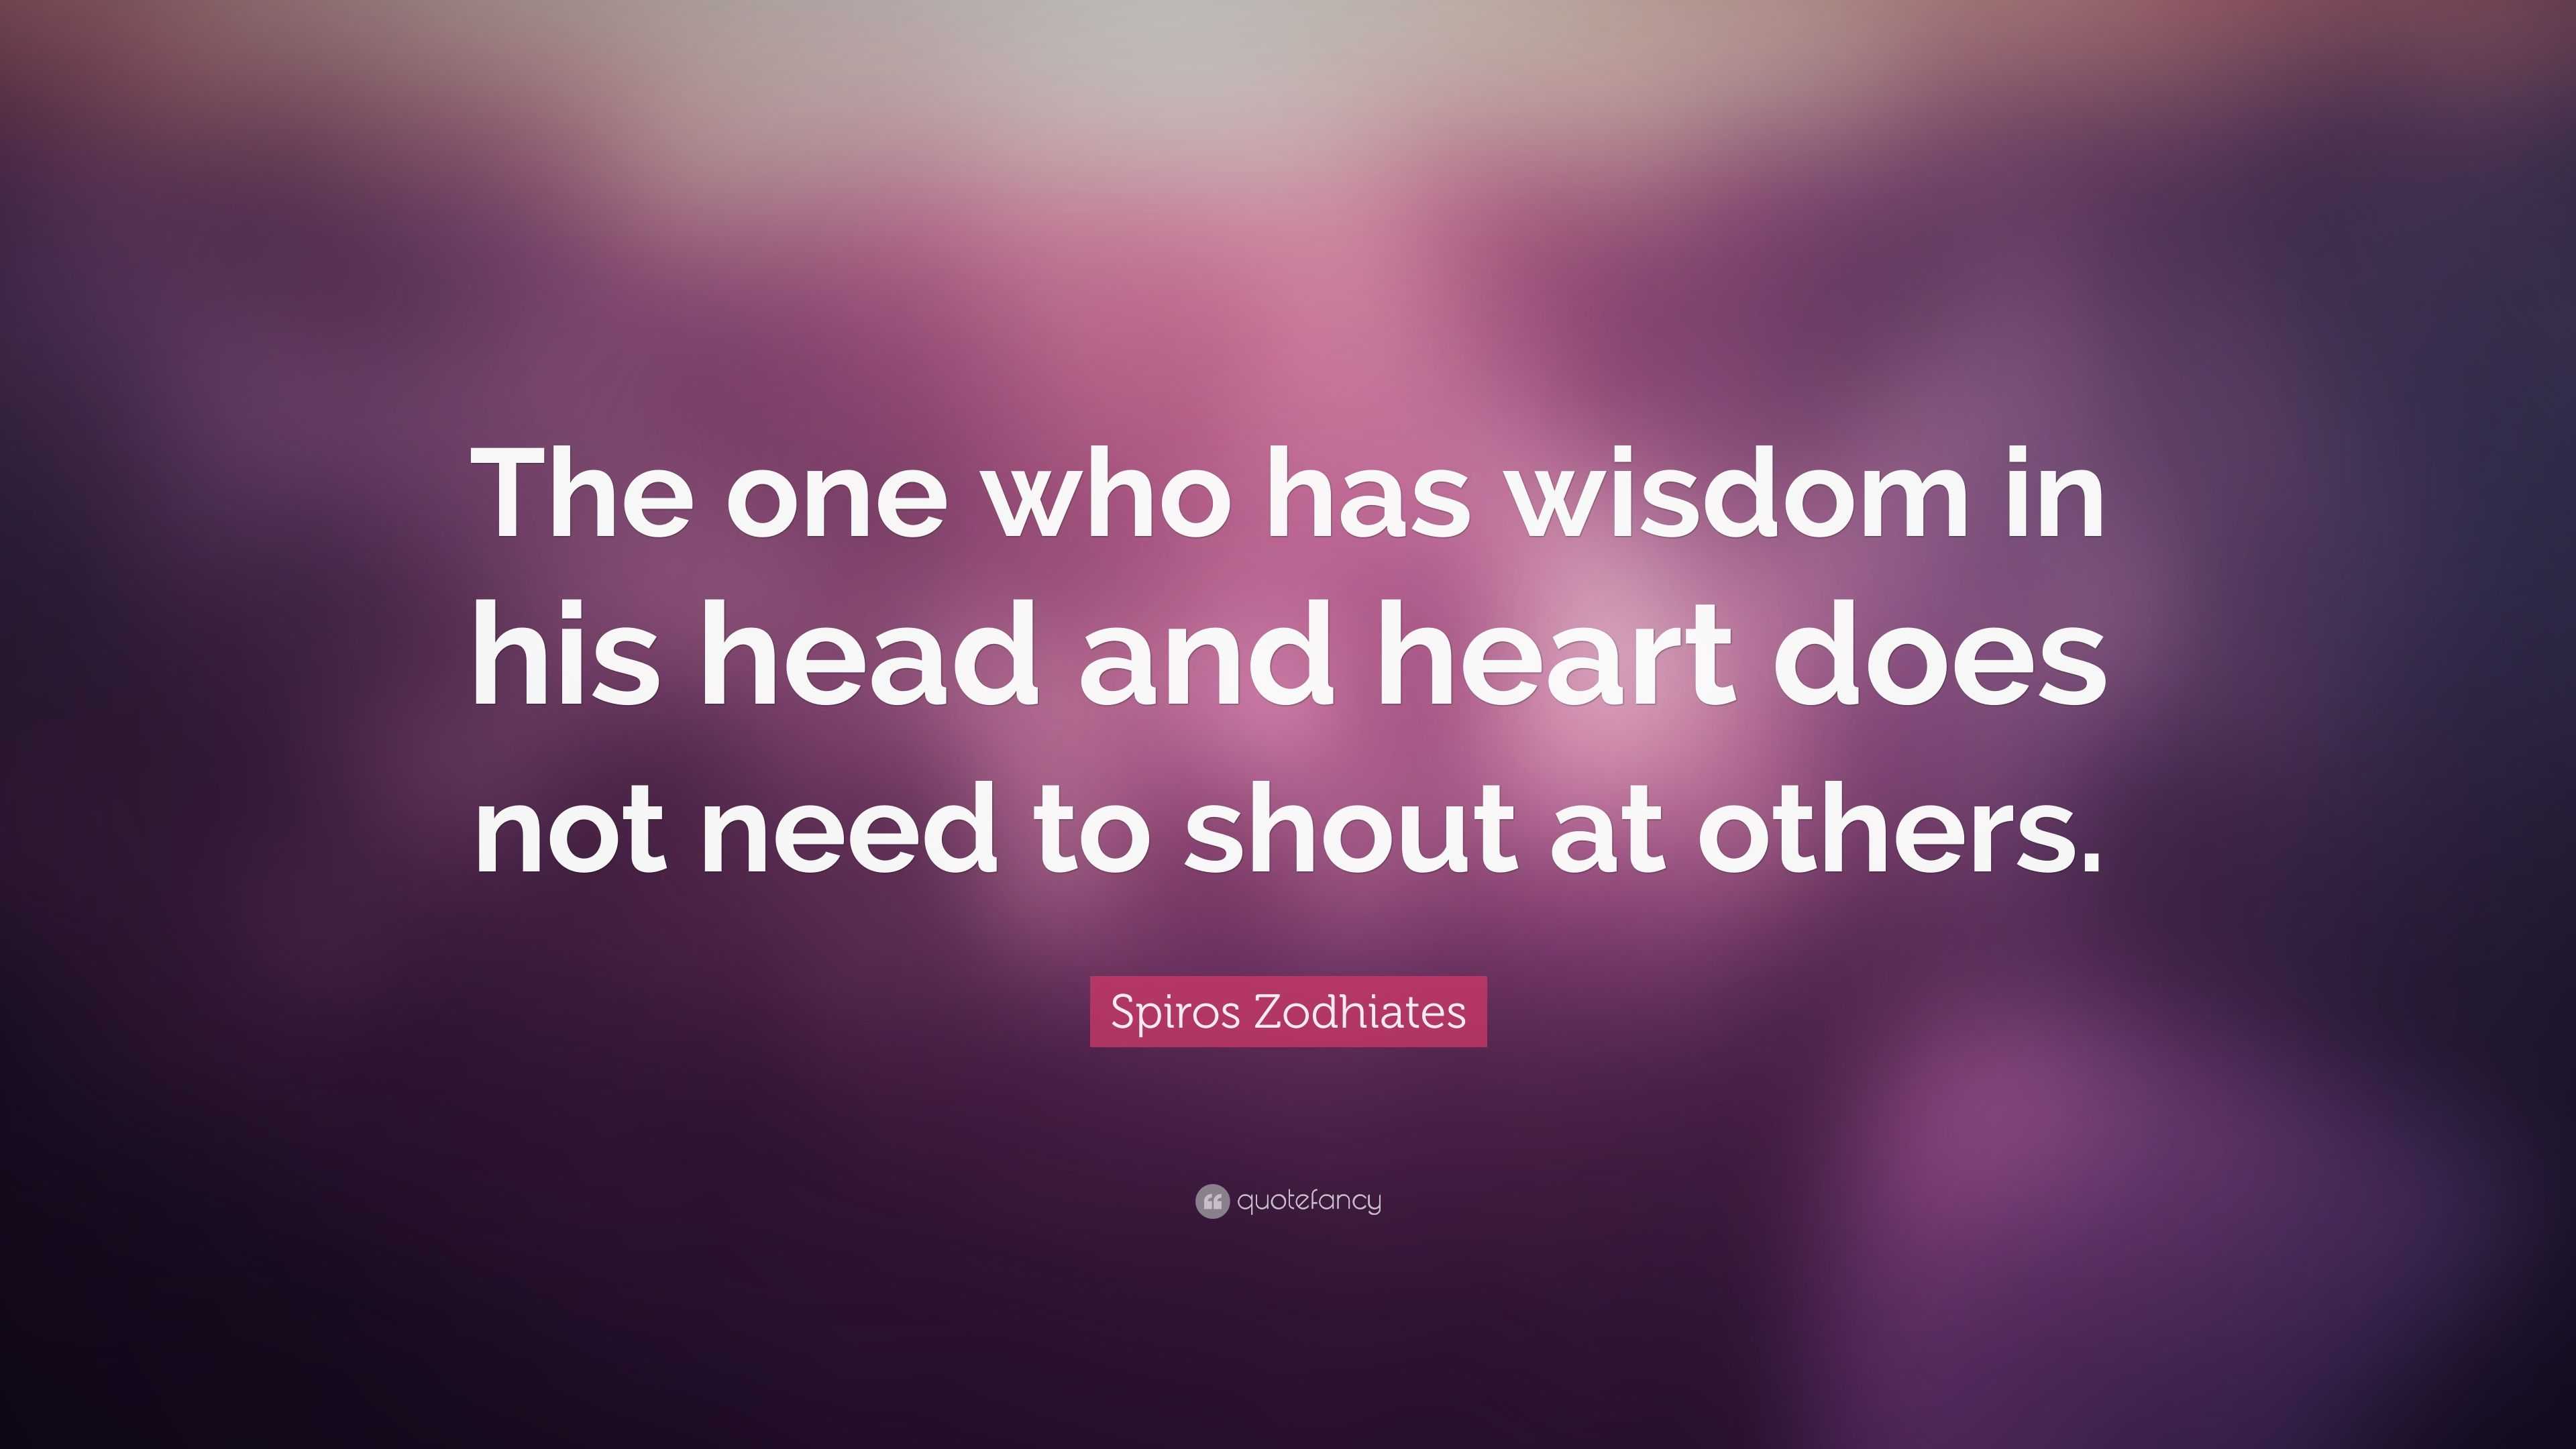 Spiros Zodhiates Quote: “The one who has wisdom in his head and heart ...